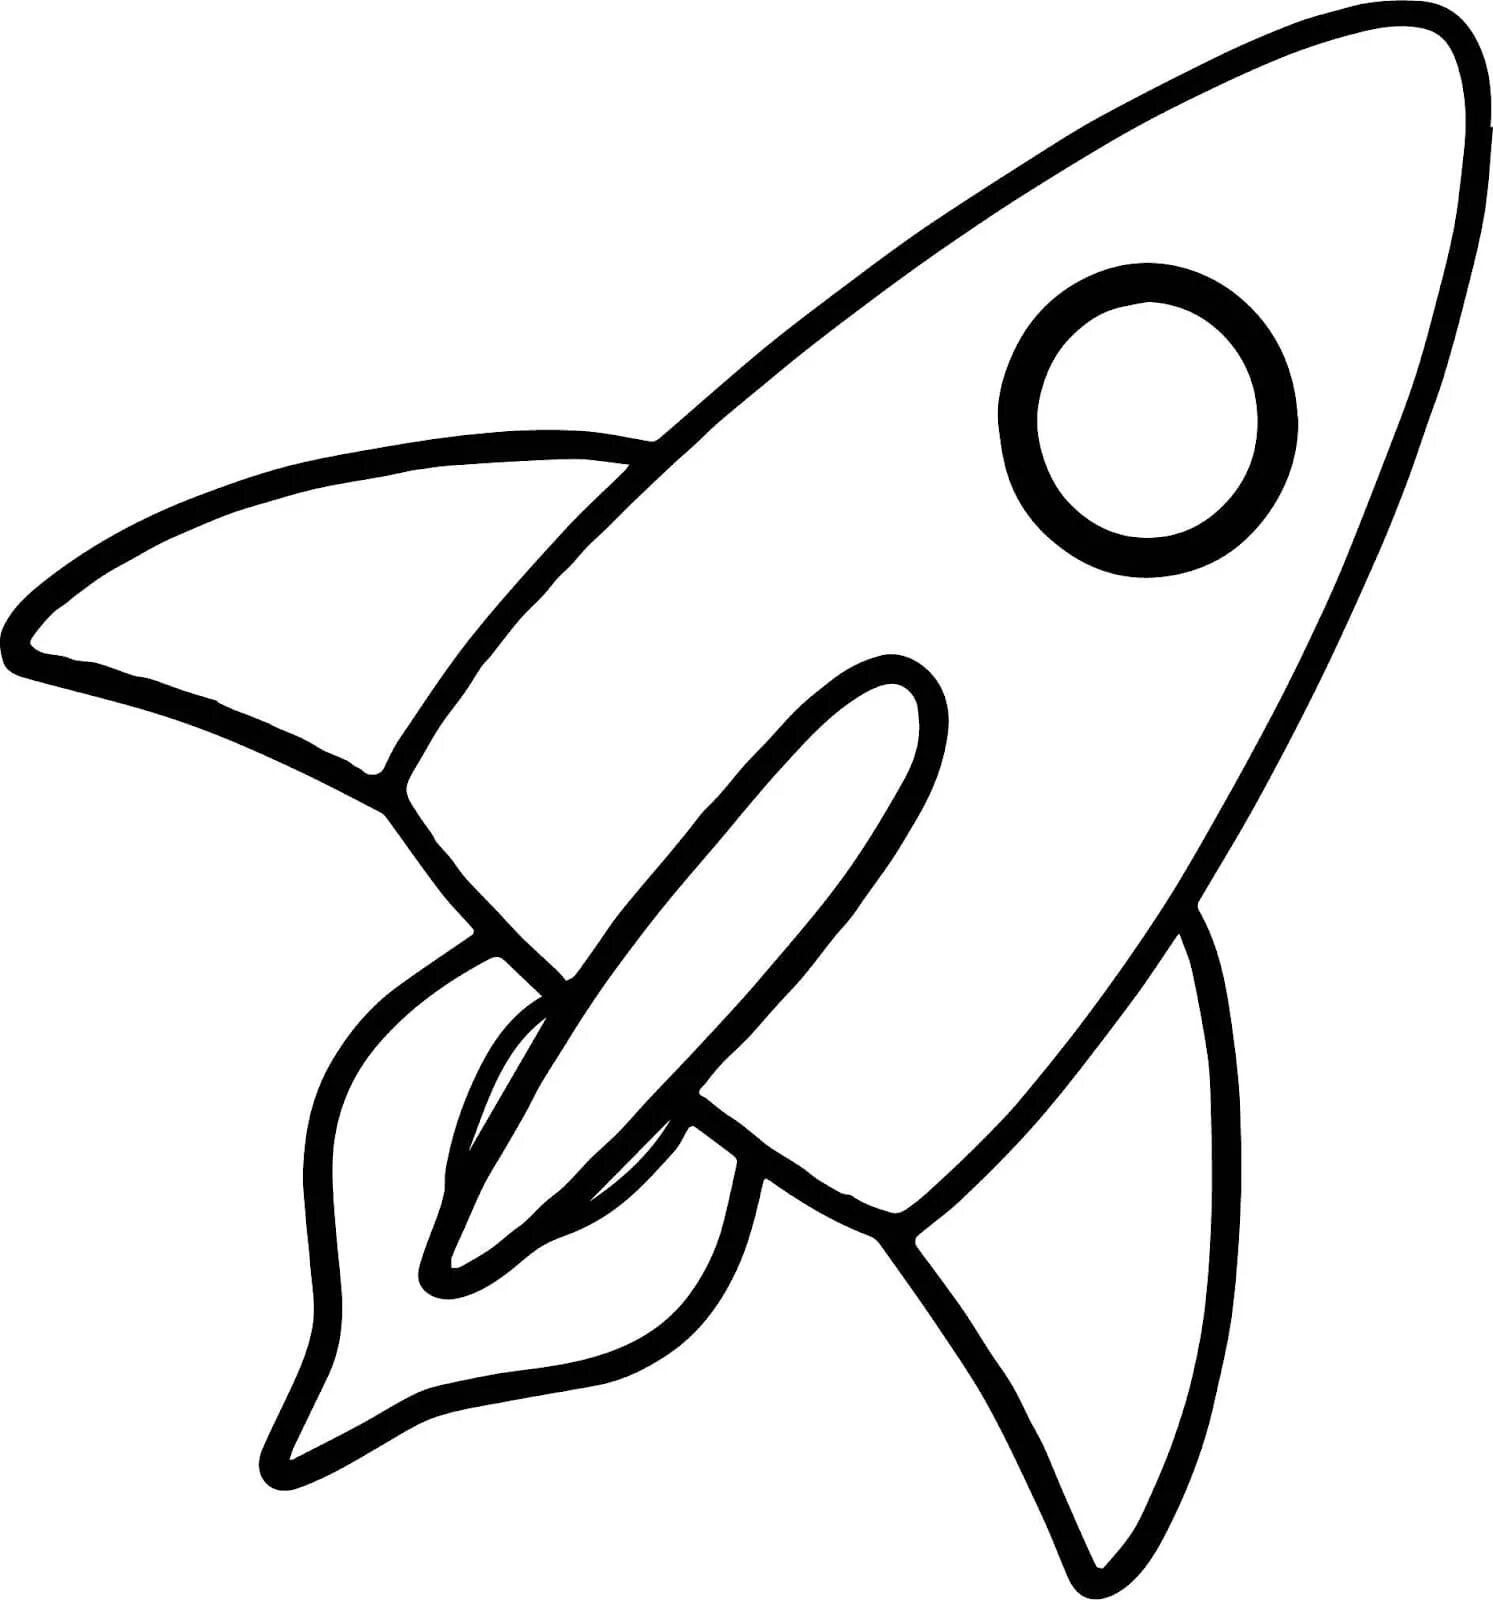 Colorful bright rocket coloring book for children 4-5 years old